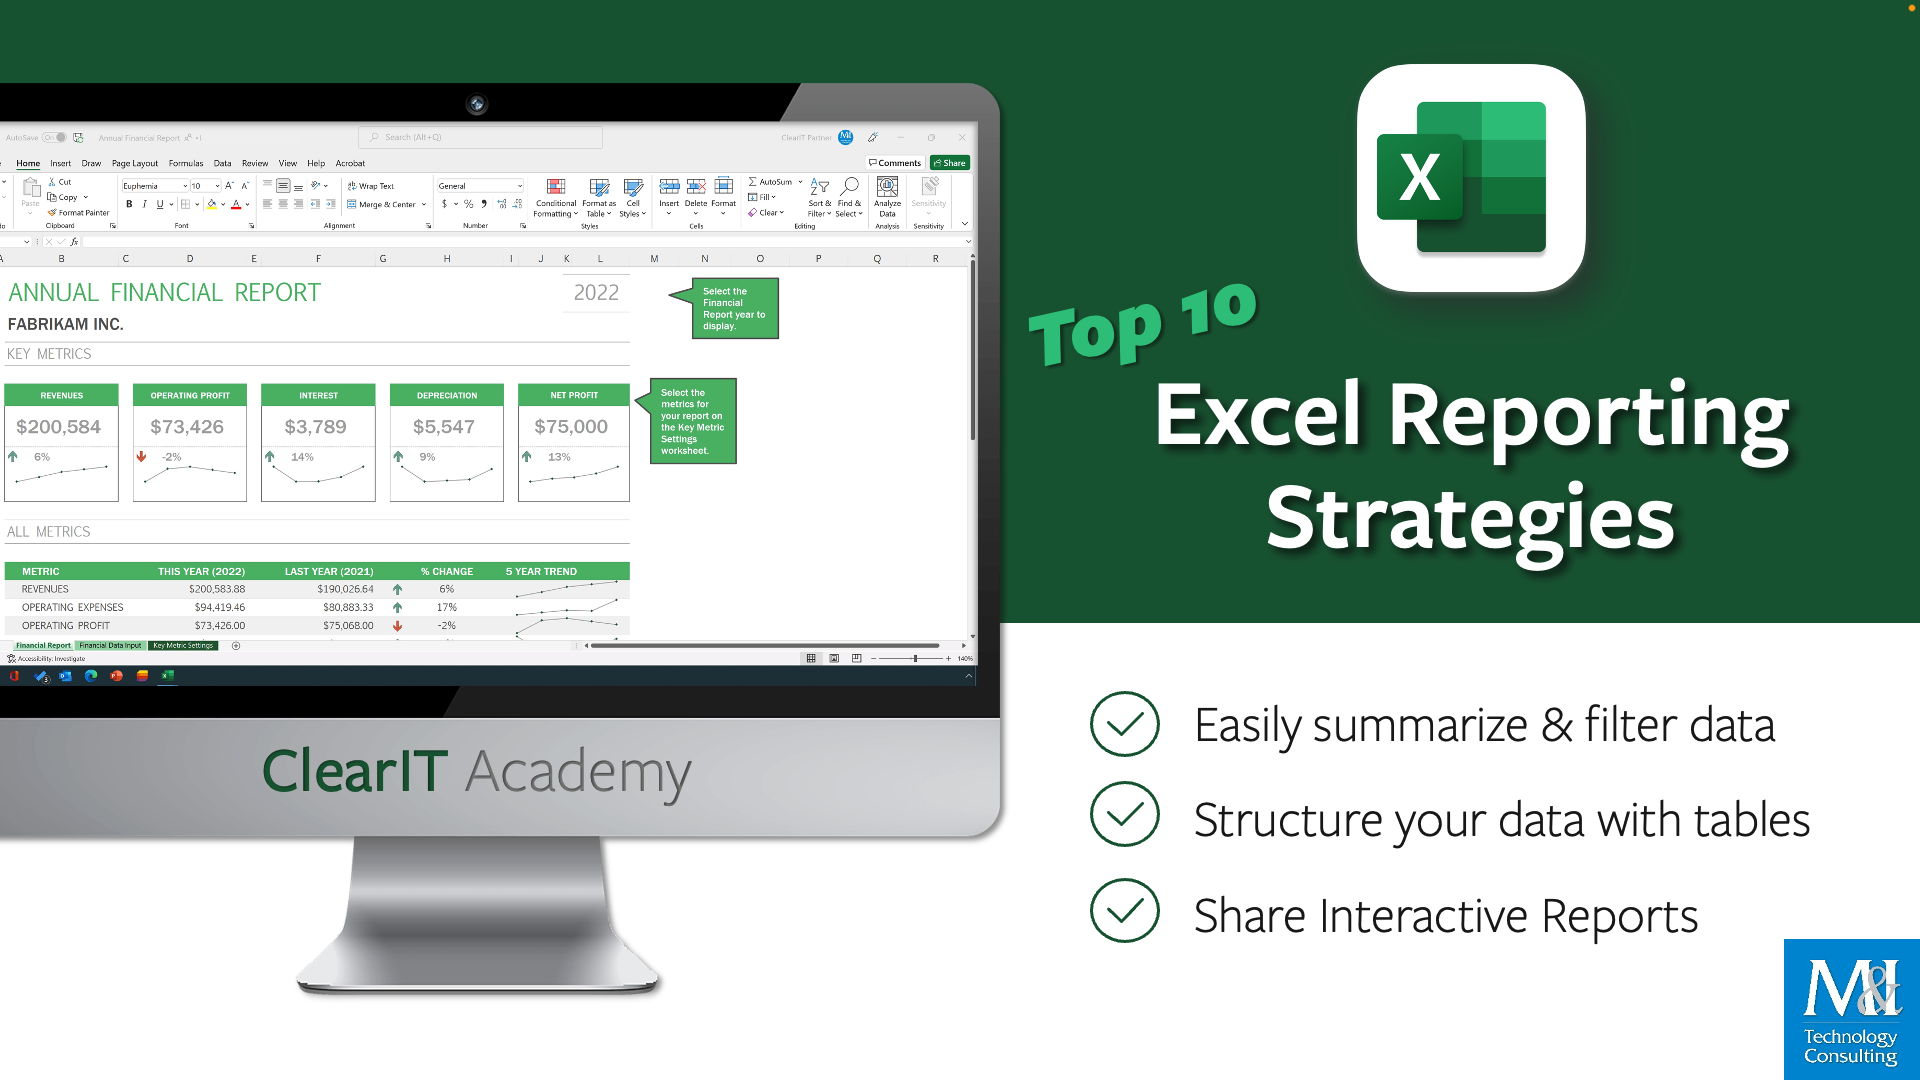 clearit-academy-top-10-excel-reporting-strategies.png